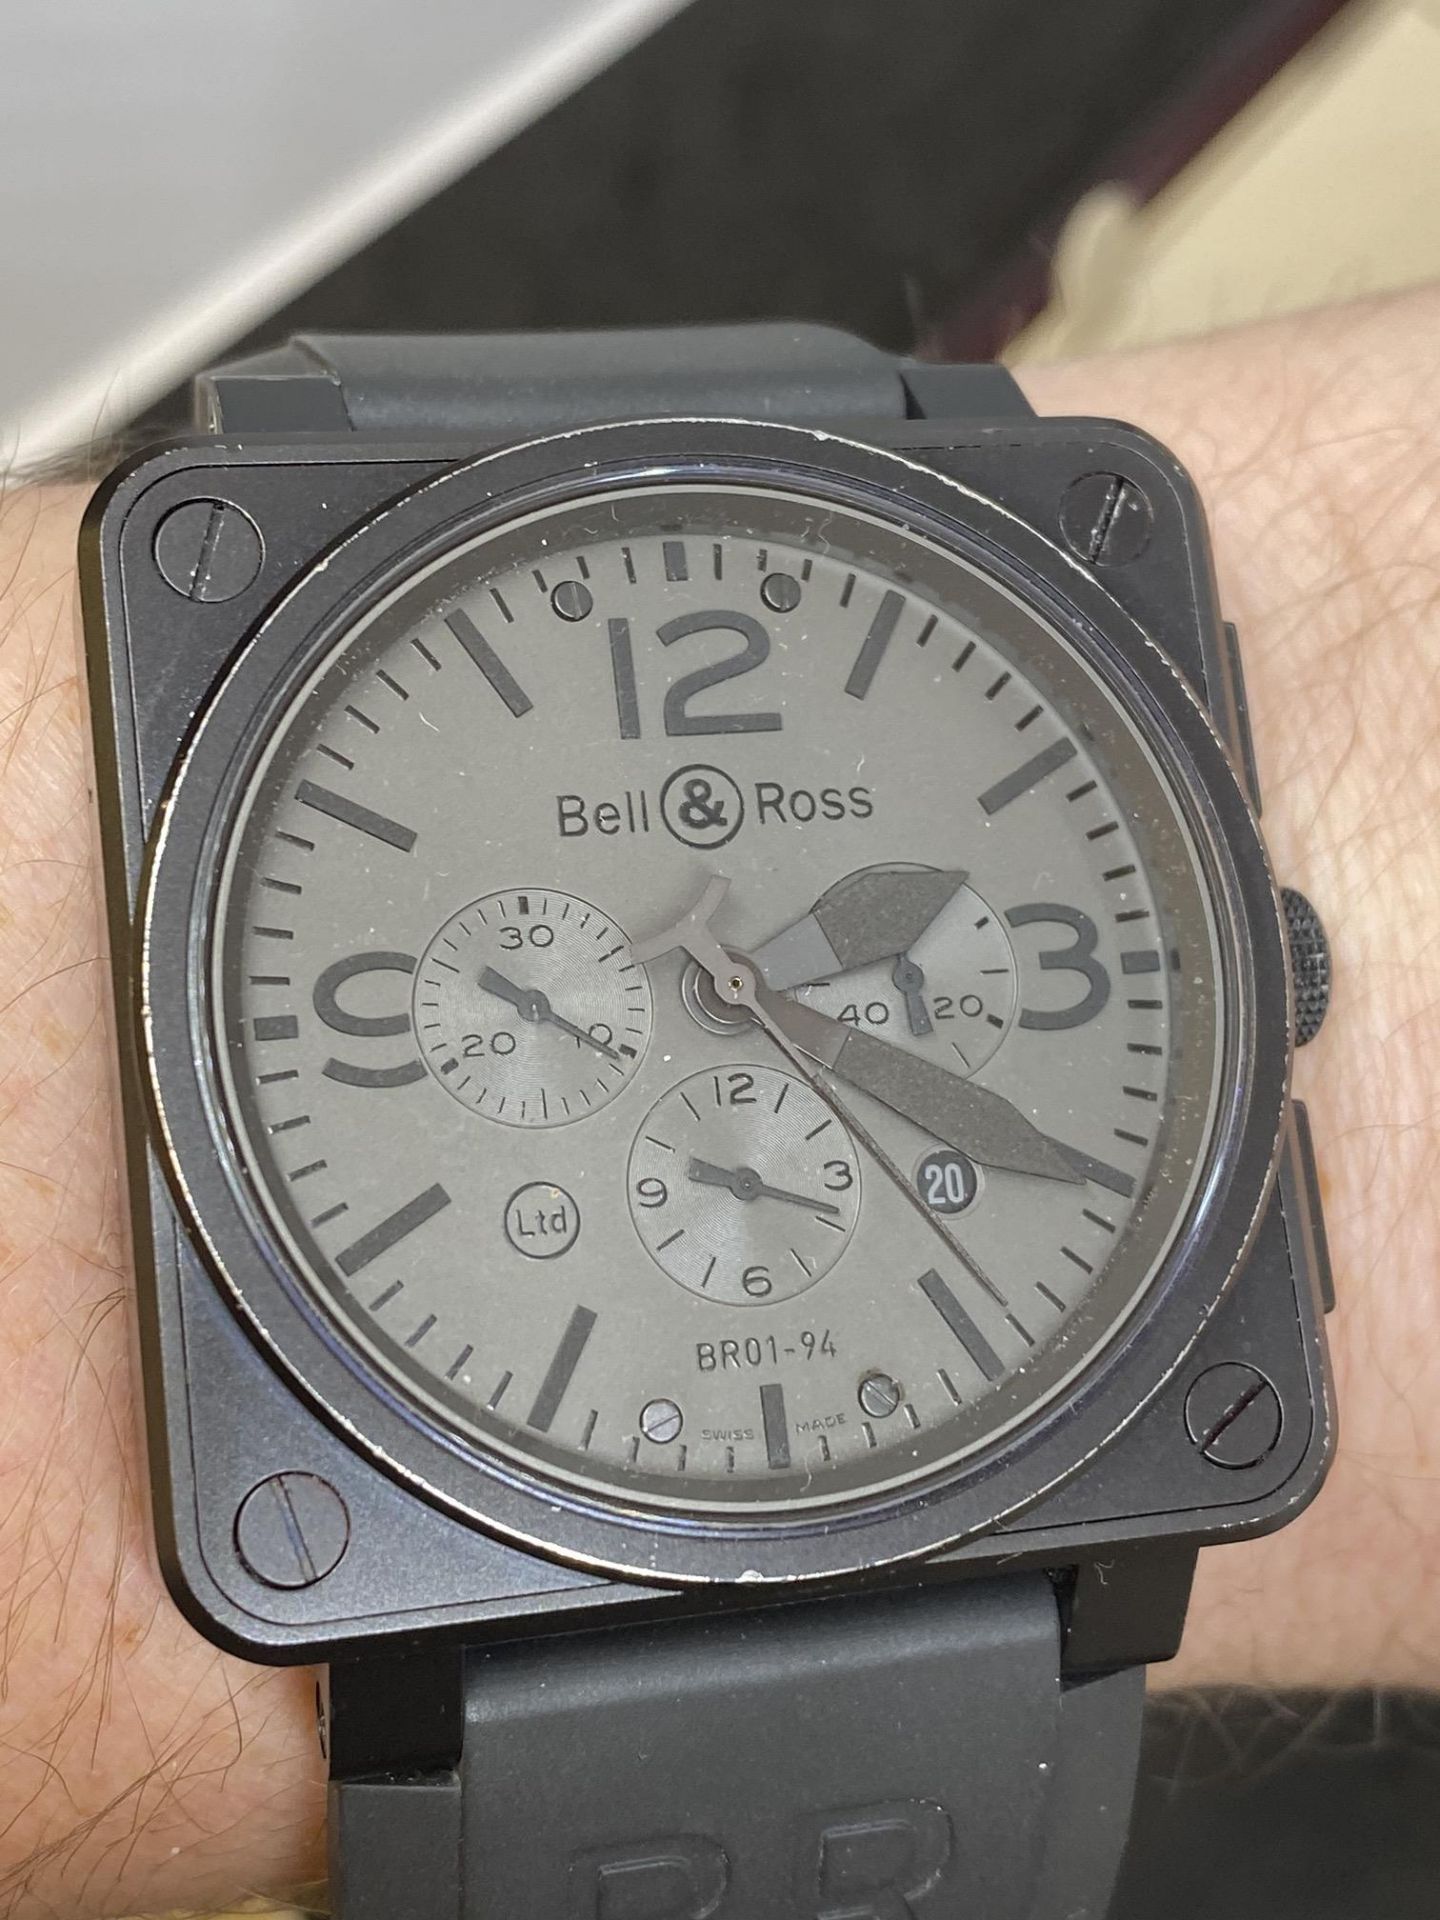 BELL & ROSS BRO1-94 LIMITED EDITION WATCH - Image 9 of 10